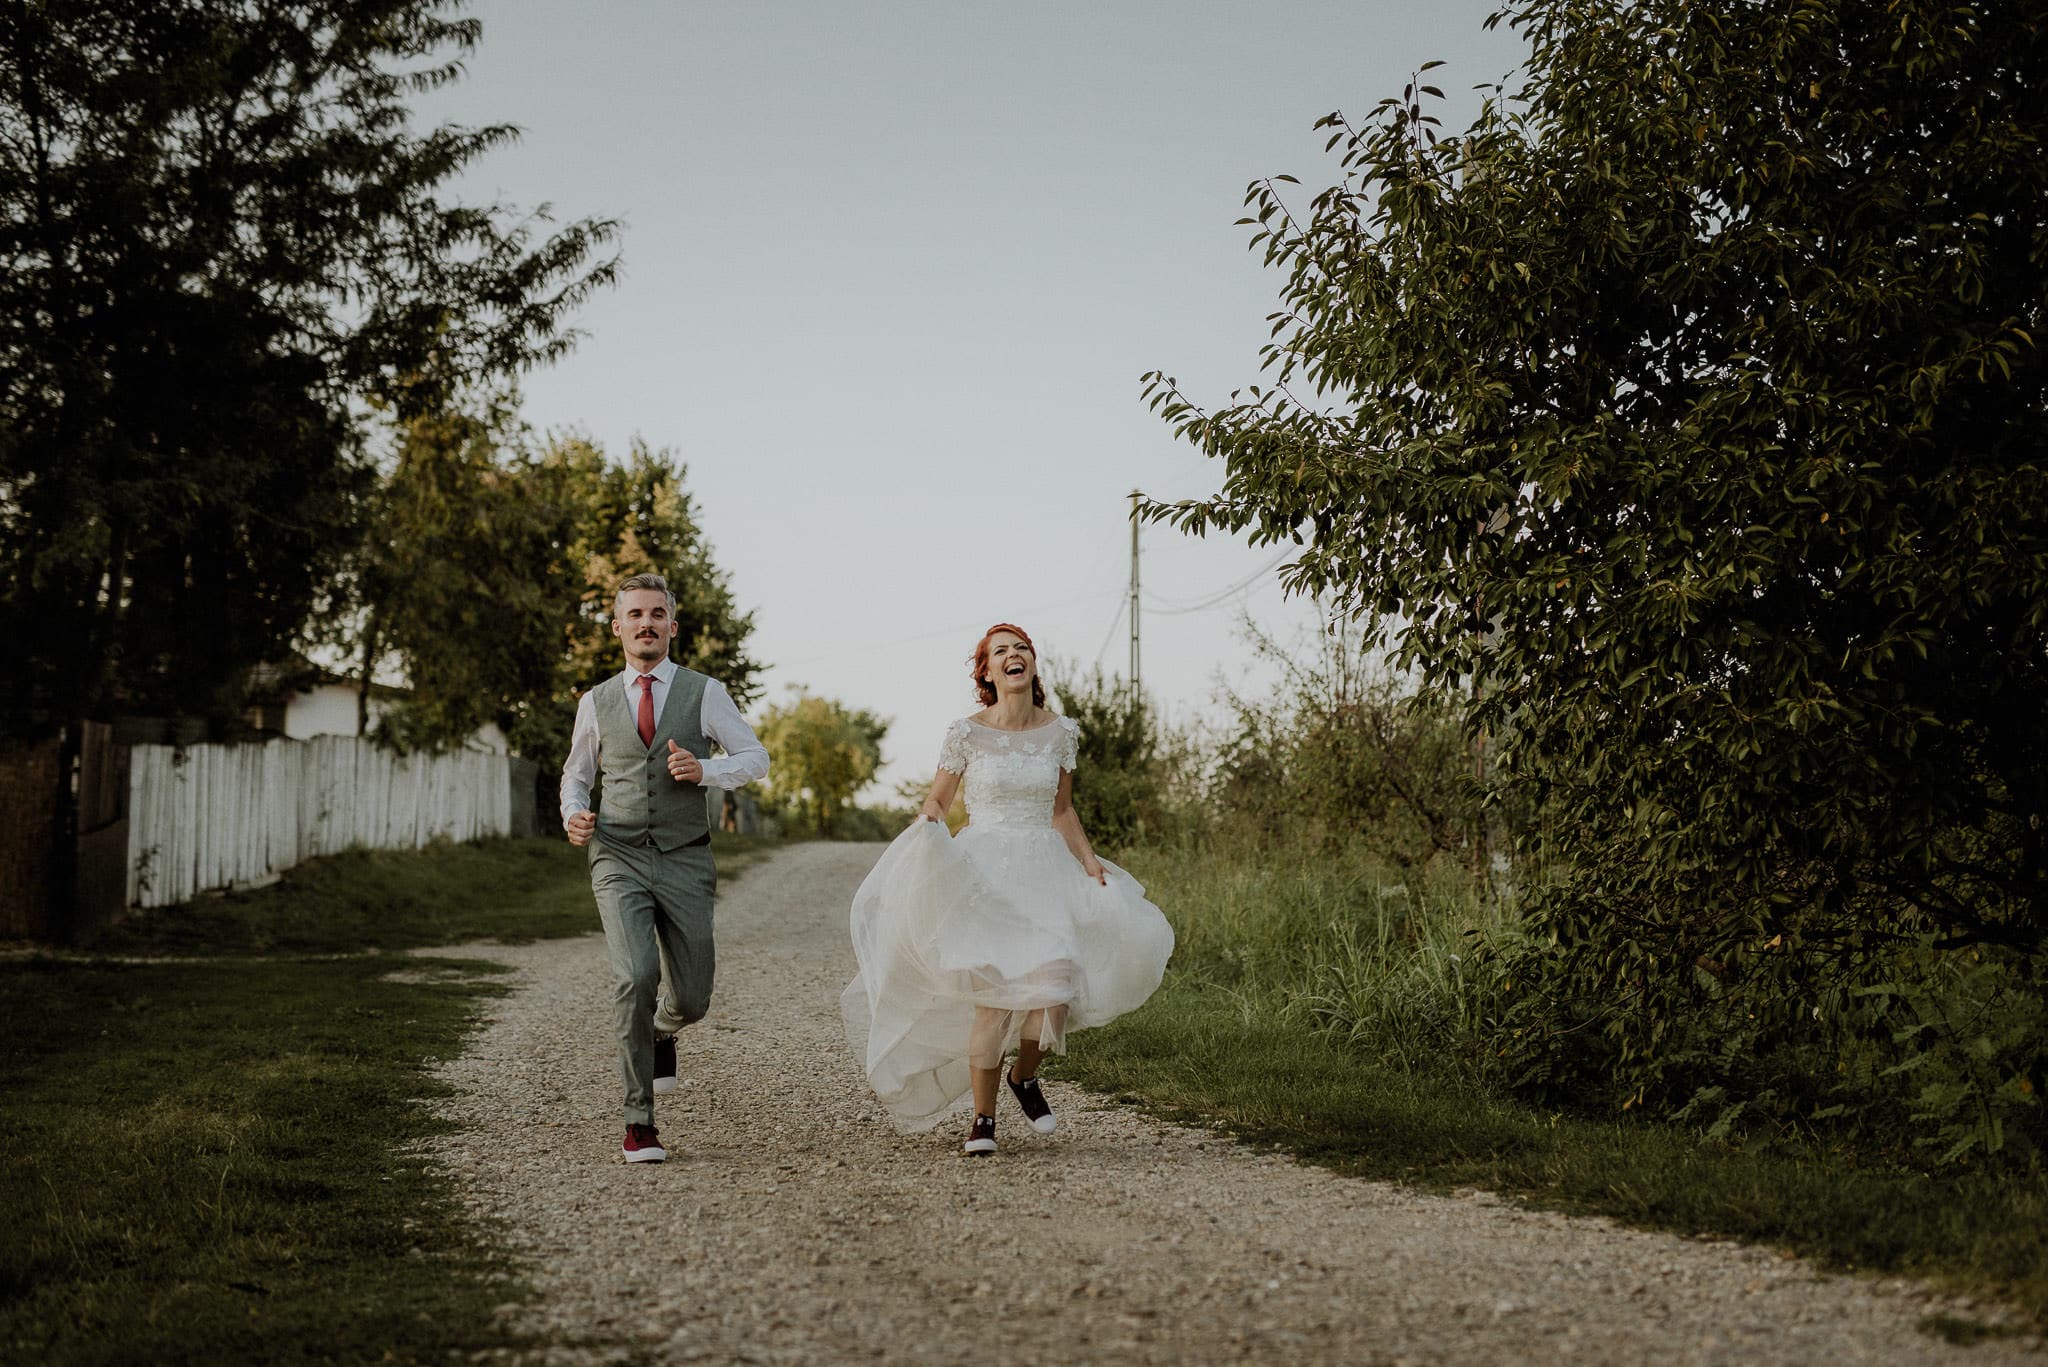 newlyweds running together in the natural outdoors